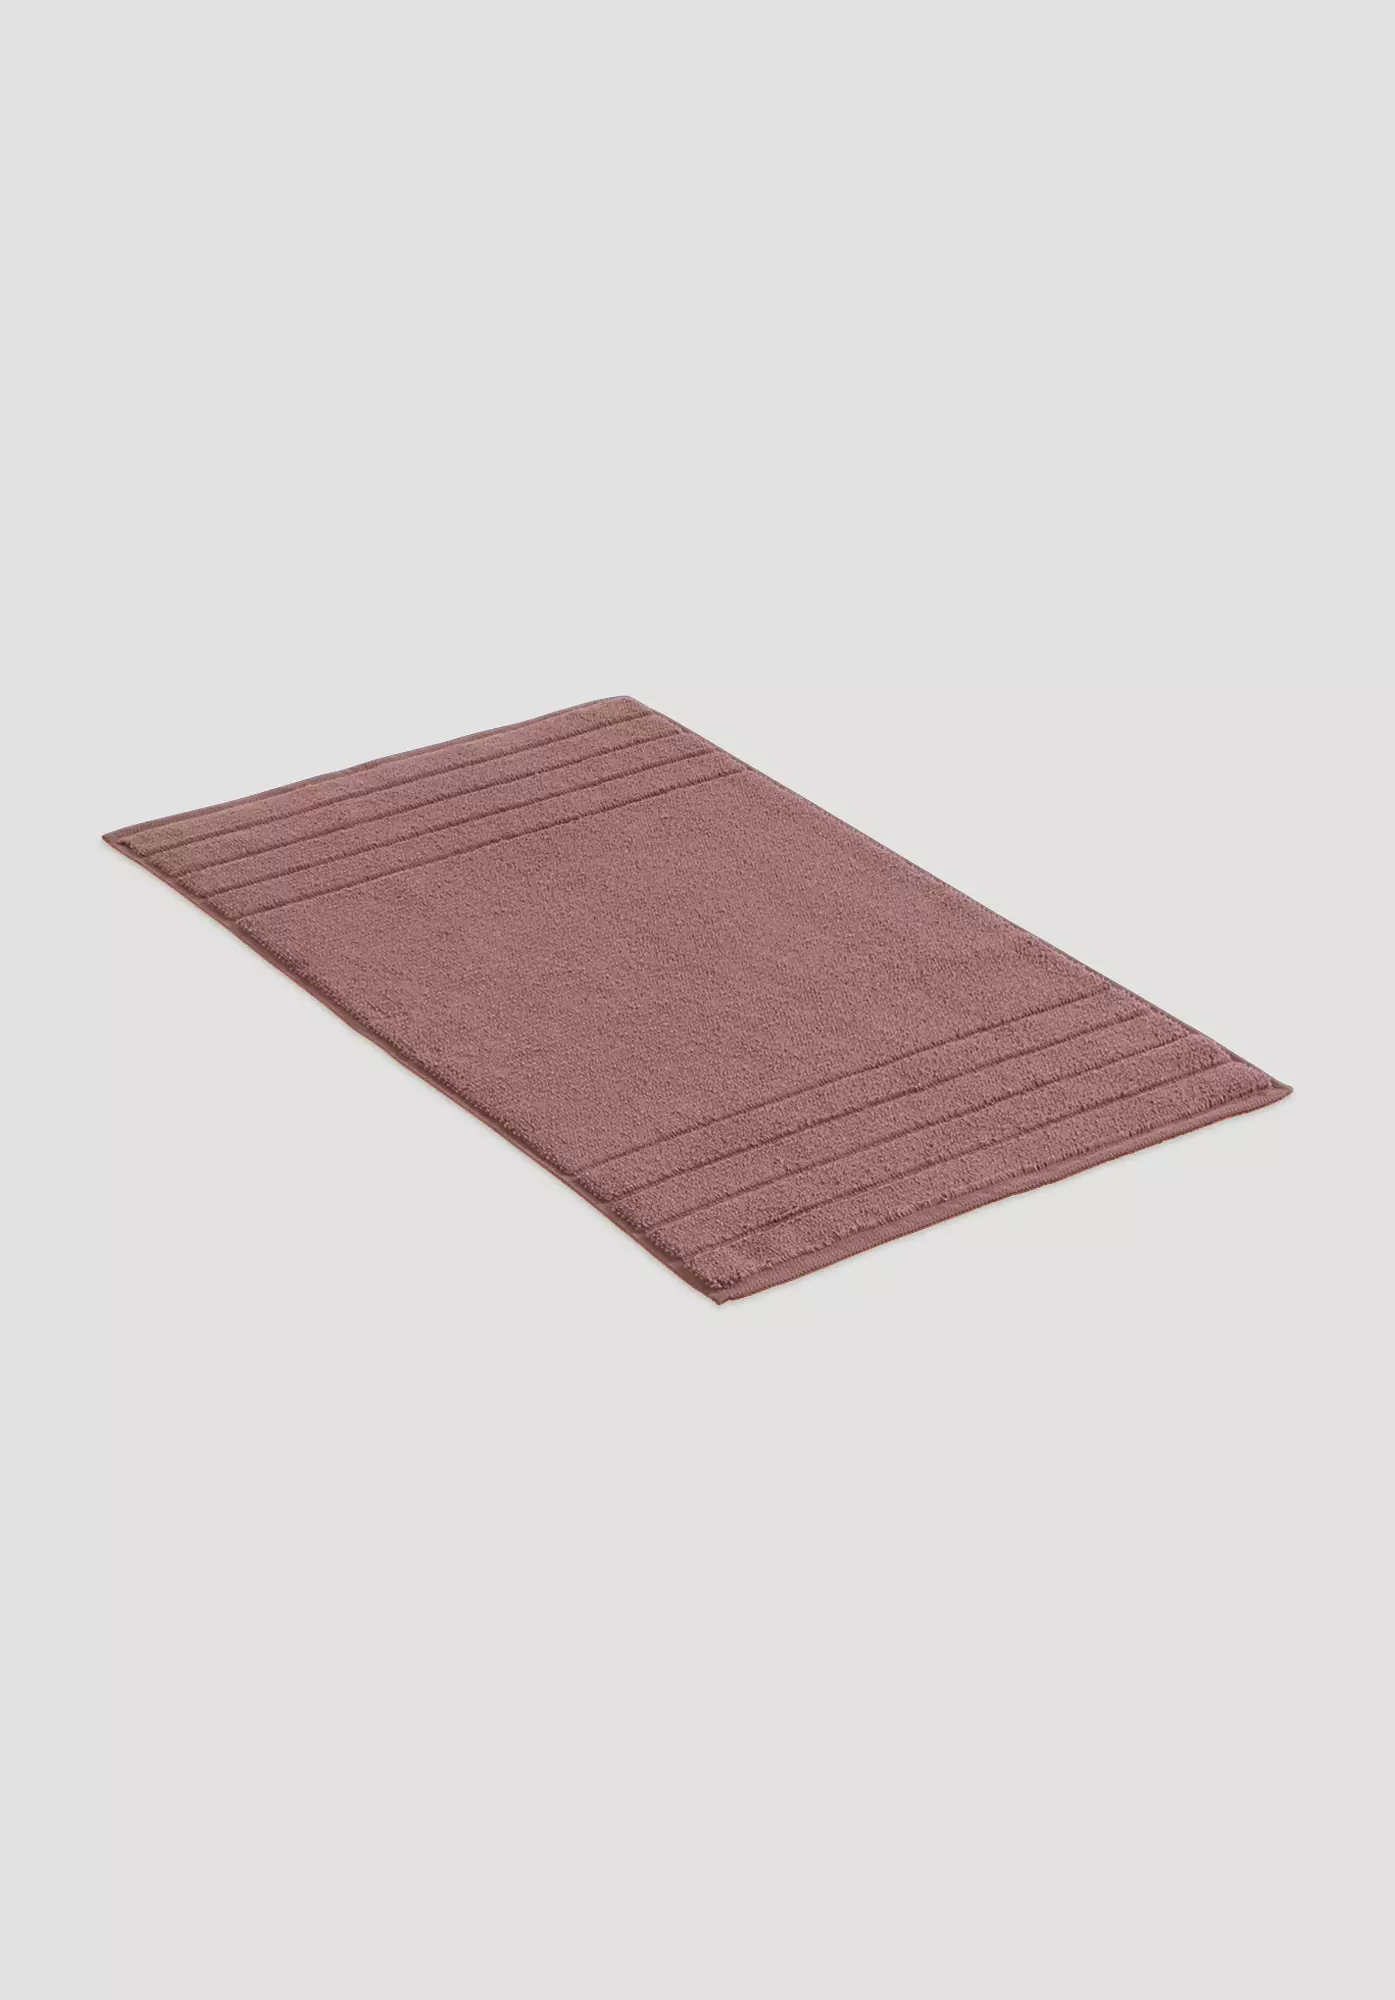 Terry cloth bath mat made from pure organic cotton - 0